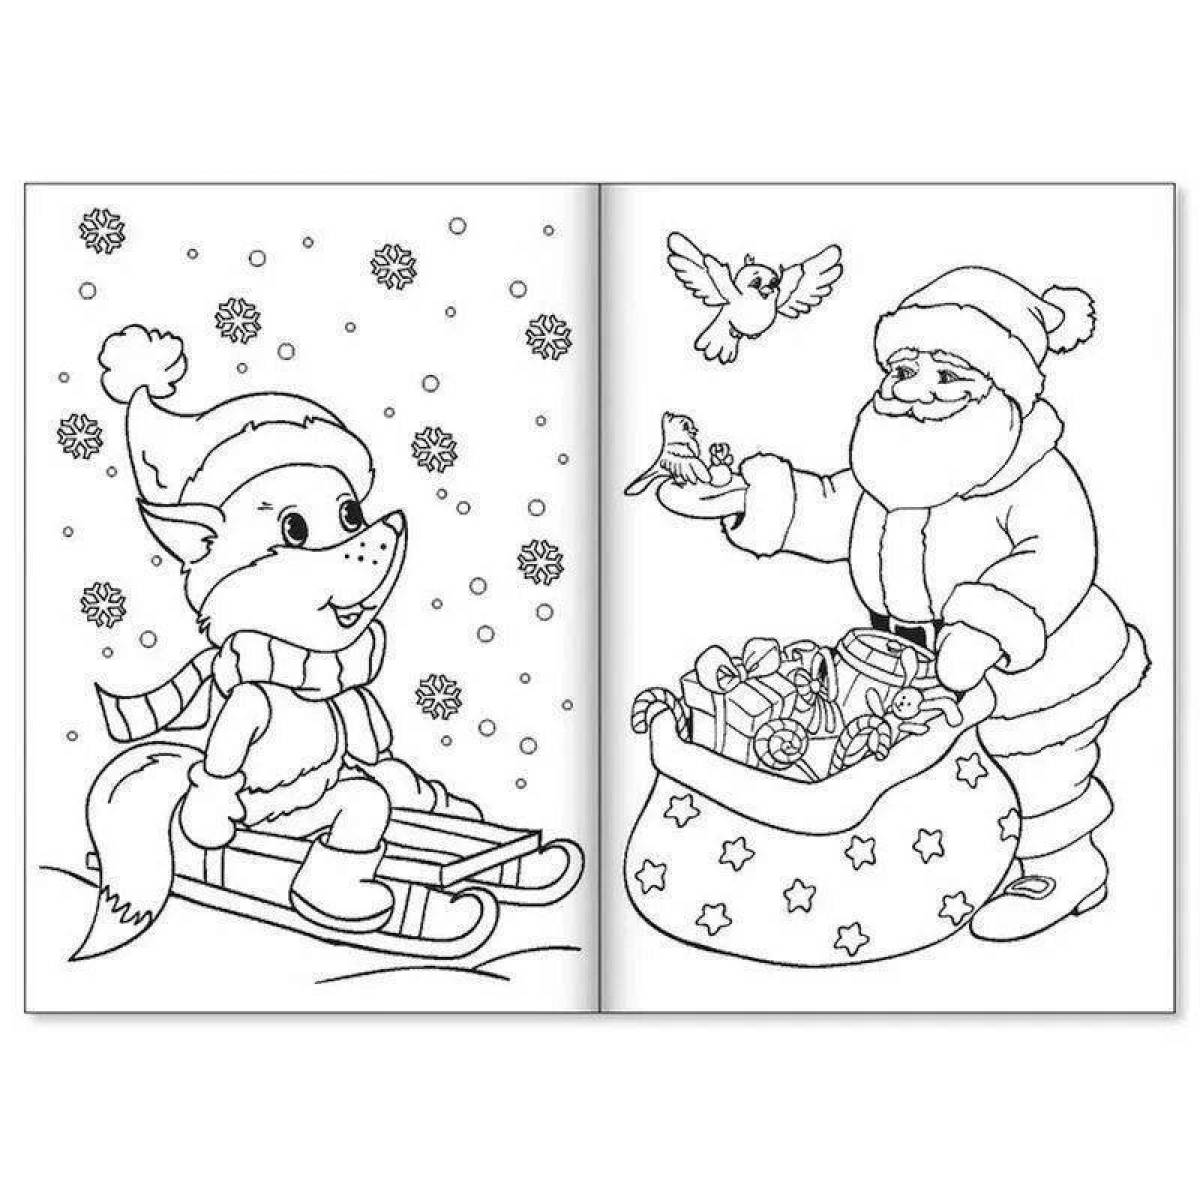 Creative coloring two drawings